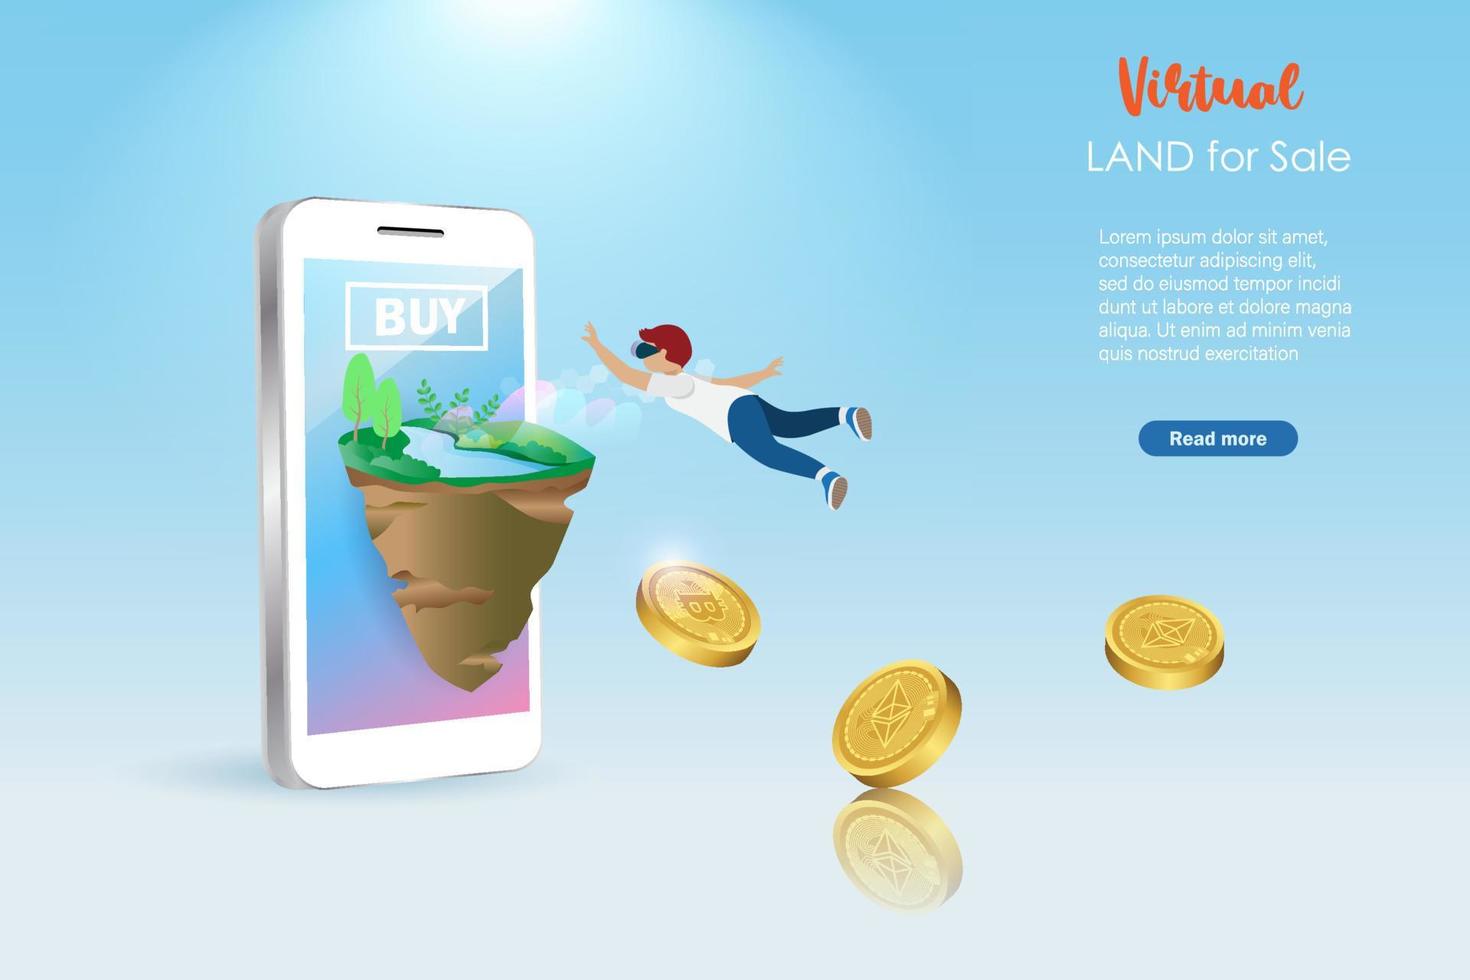 Metaverse virtual land for sale, Futuristic real estate investment, financial technology in VR world. Flying man buy virtual land for sale on smartphone screen by crypto currency coins. vector